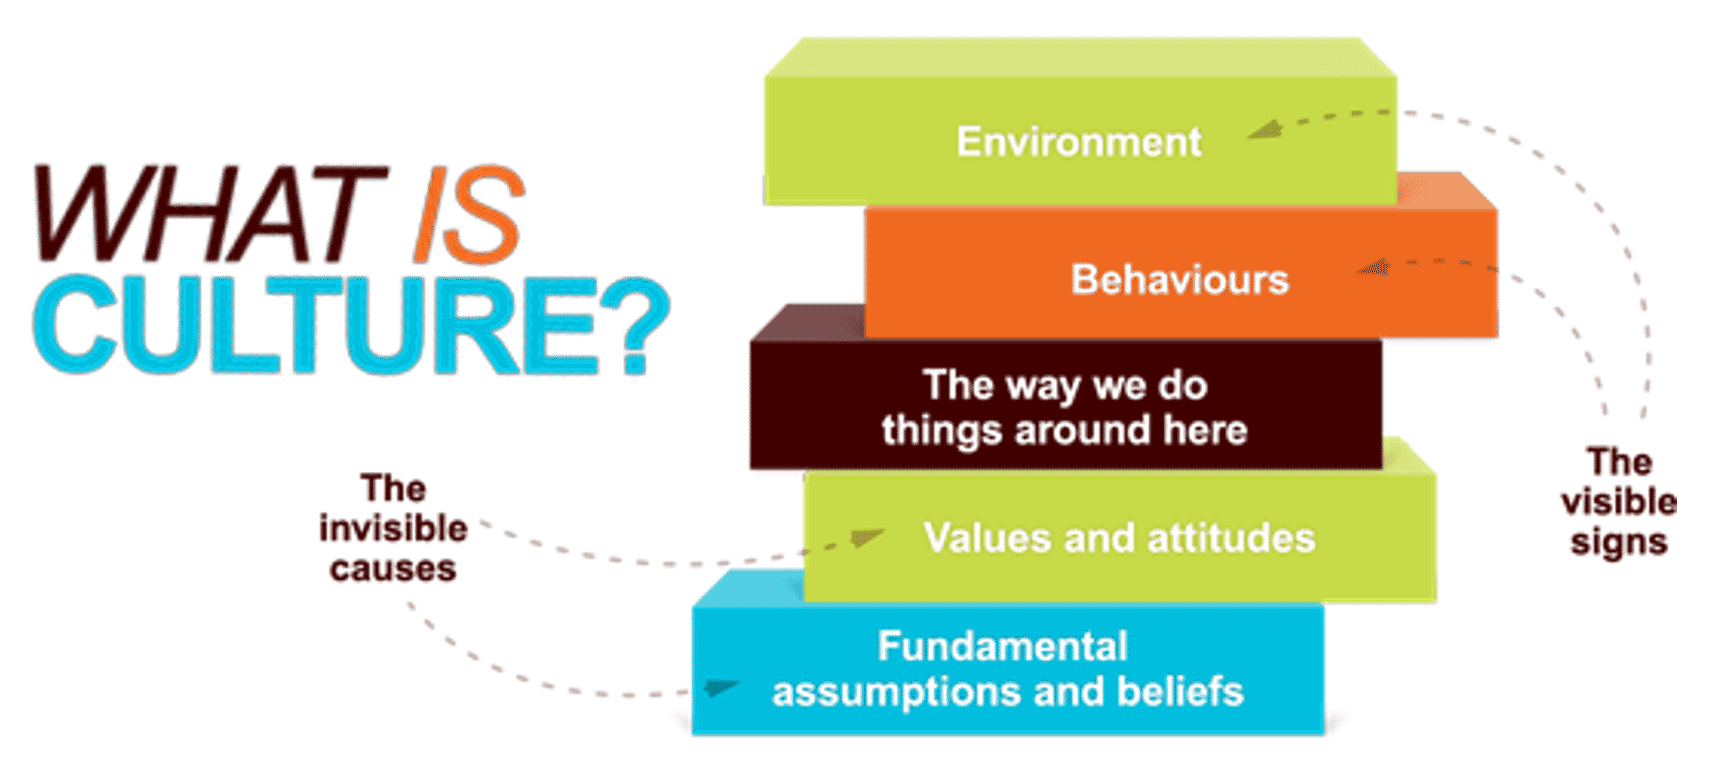 A visualization of the organizational culture of a company asks the question 'What is culture?' Five boxes are stacked, the bottom two are noted as 'The invisible causes' and the top two are noted as 'The visible signs'. From the bottom, 'Fundamental assumptions and beliefs', 'Values and attitudes', 'The way we do things around here', 'Behaviors', and at the top, 'Environment'. 